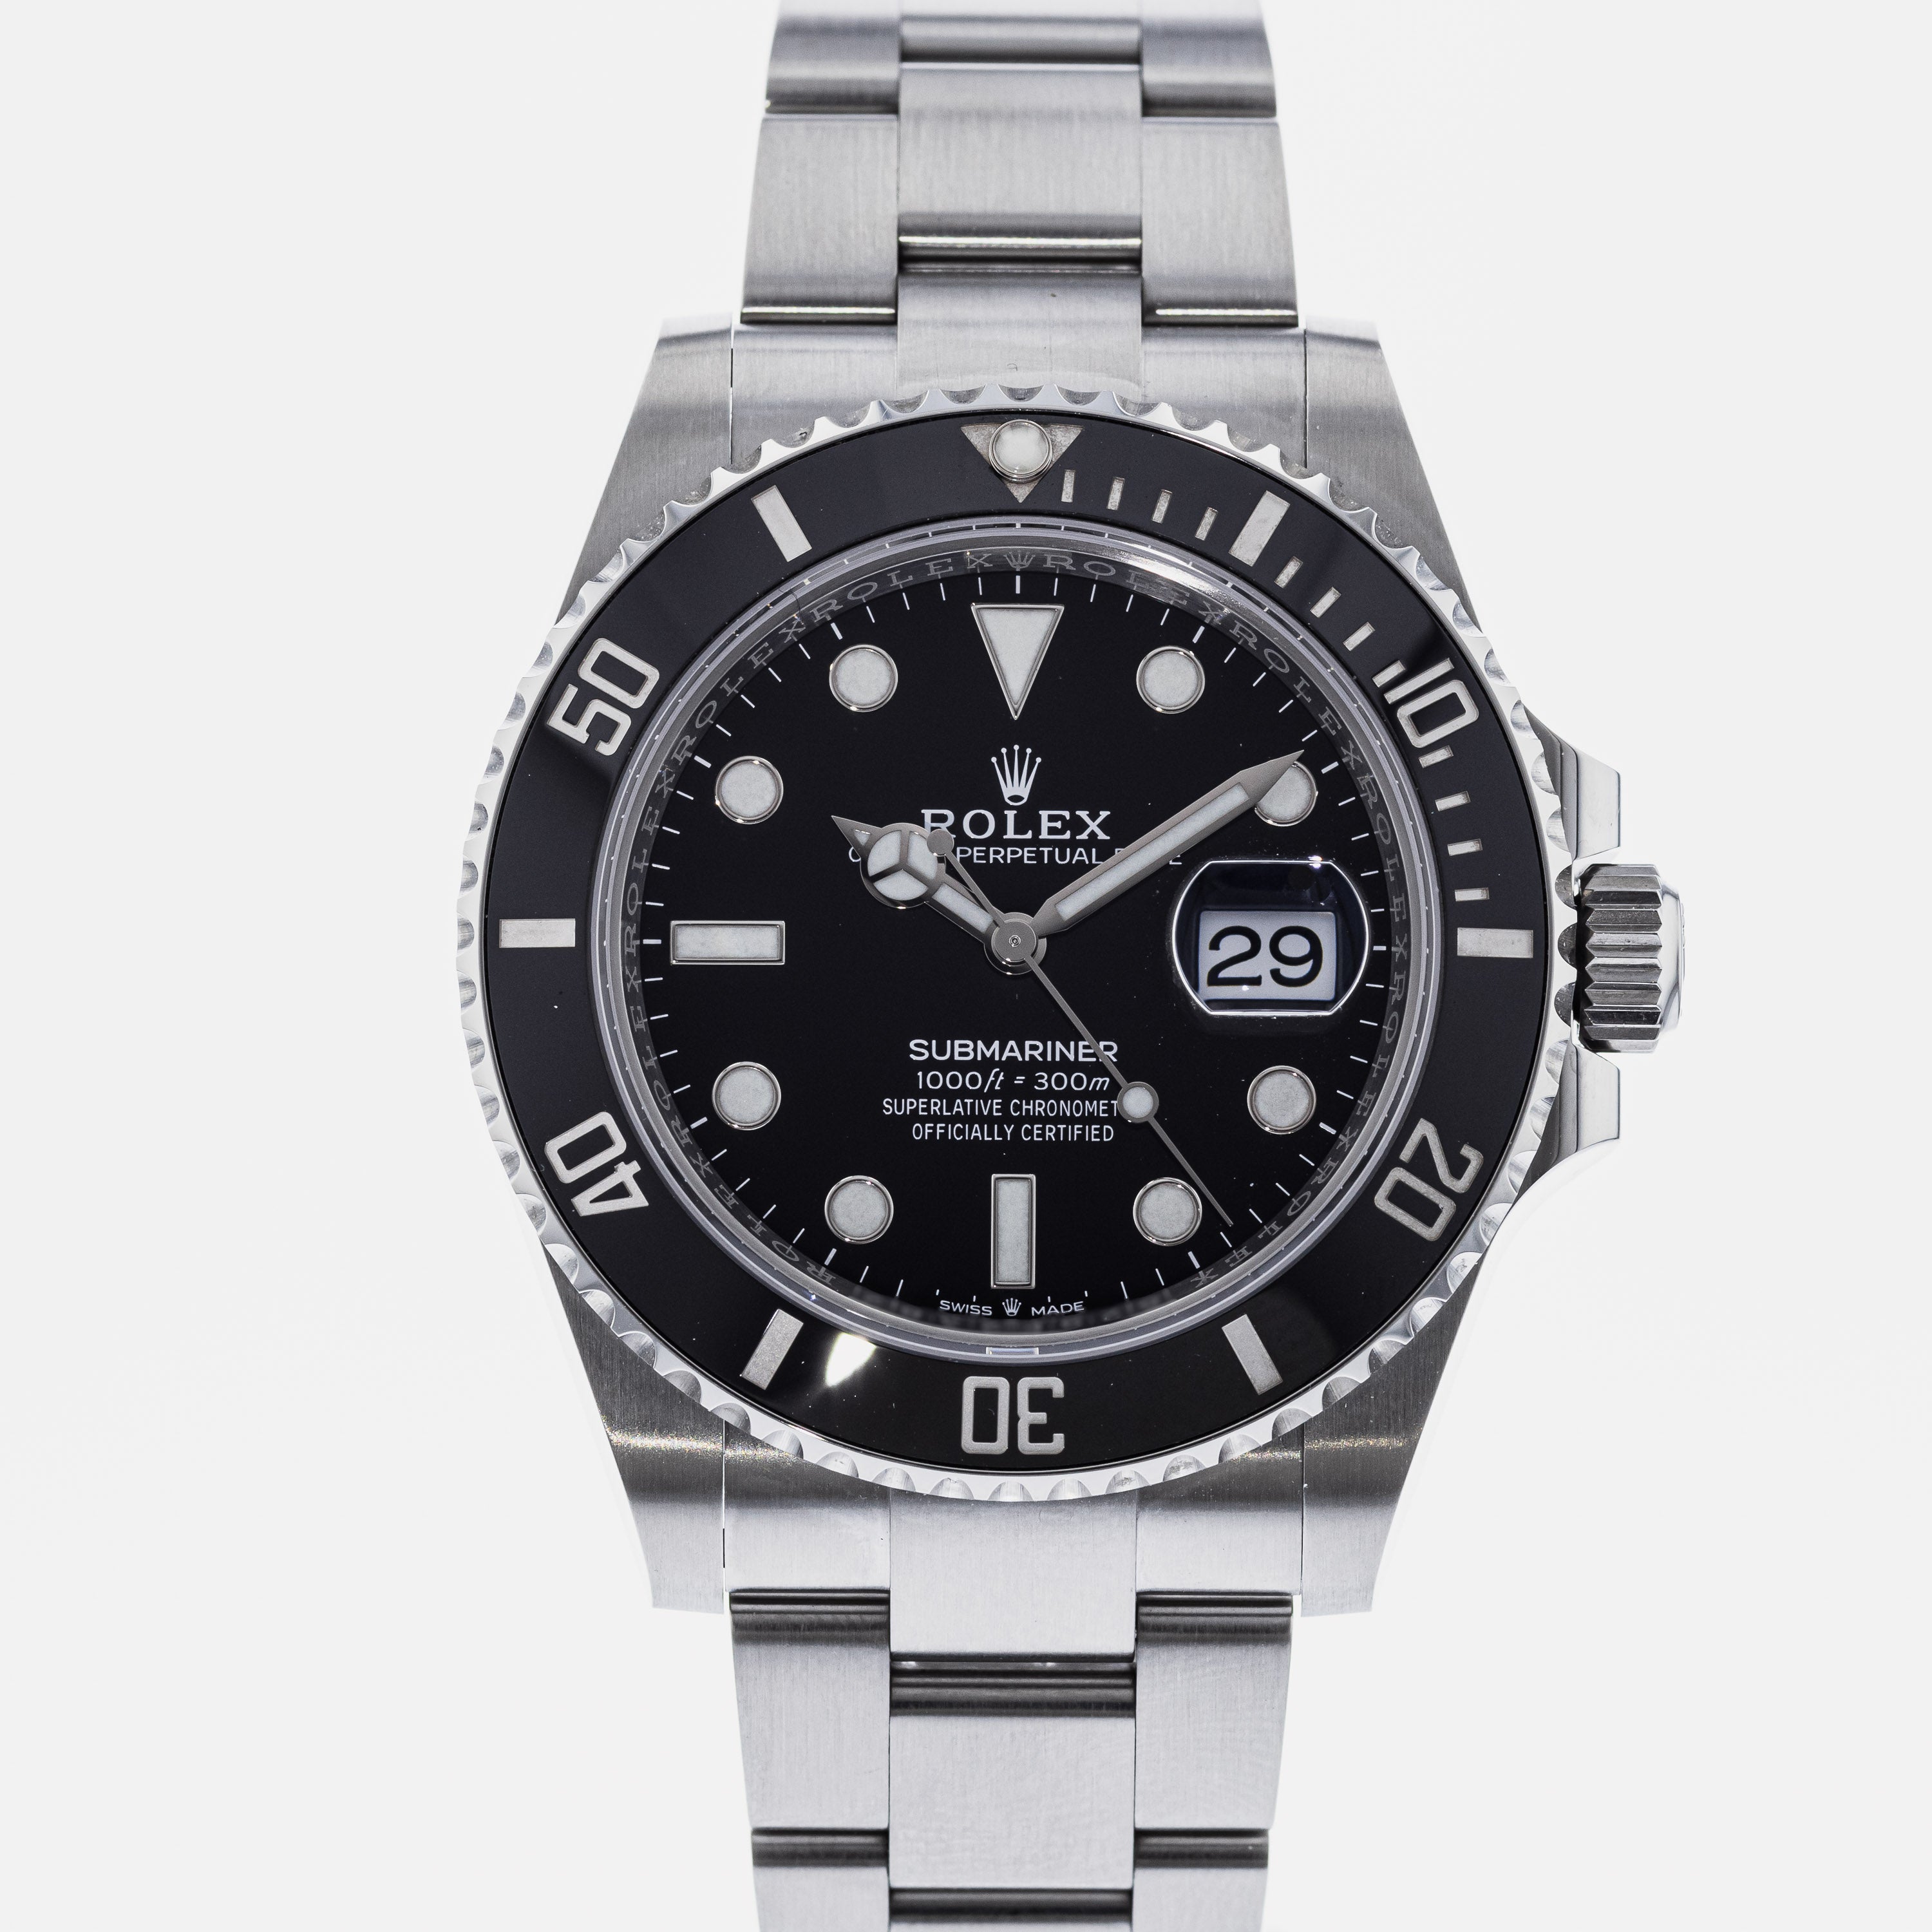 Authentic Used Rolex Submariner Date 126610 Watch (10-10-ROL-TF9LZ3)